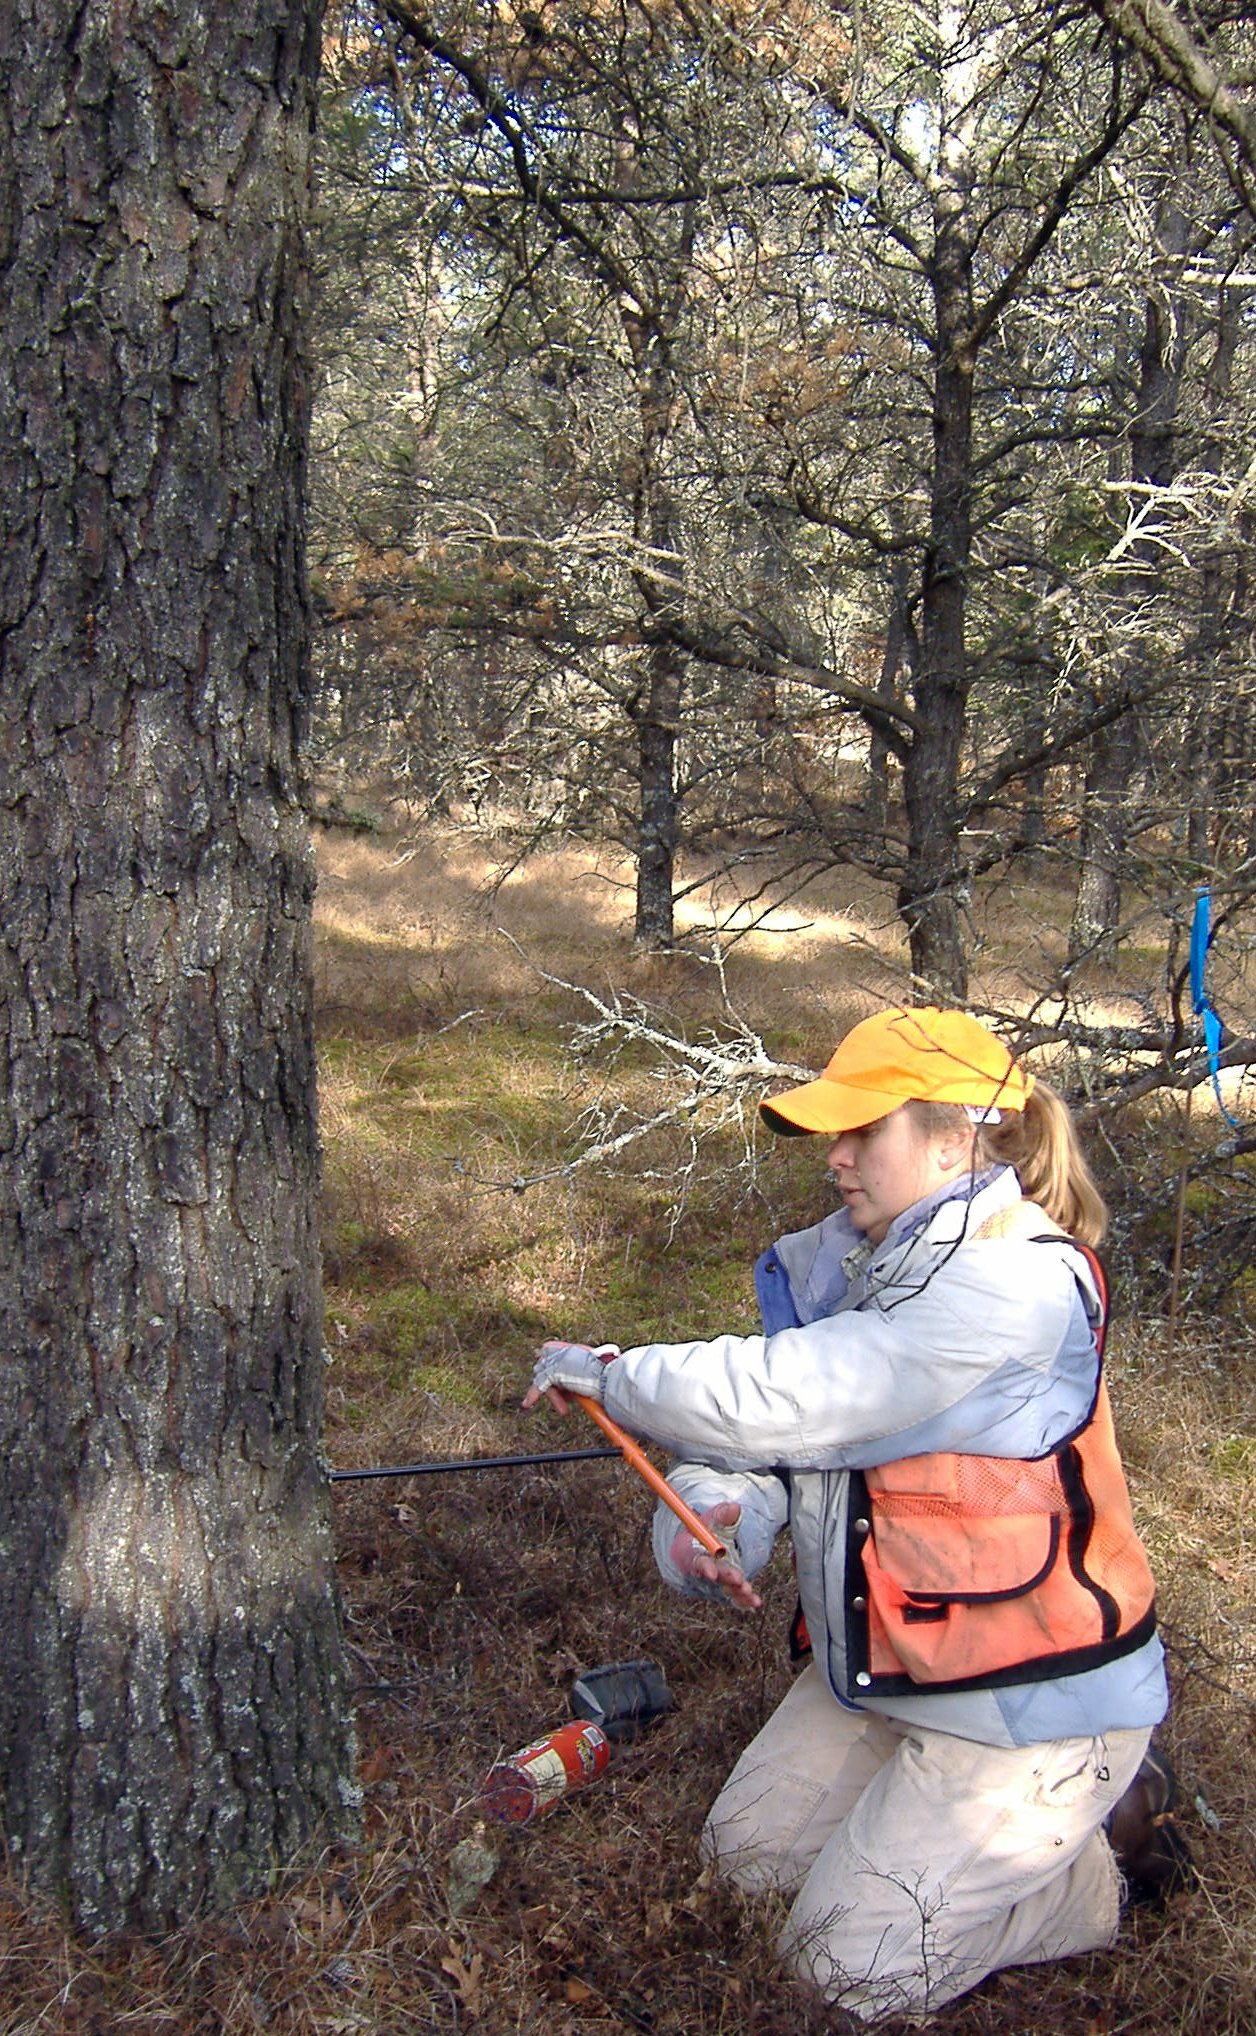 A woman in a wooded setting taking a core sample from a tree.